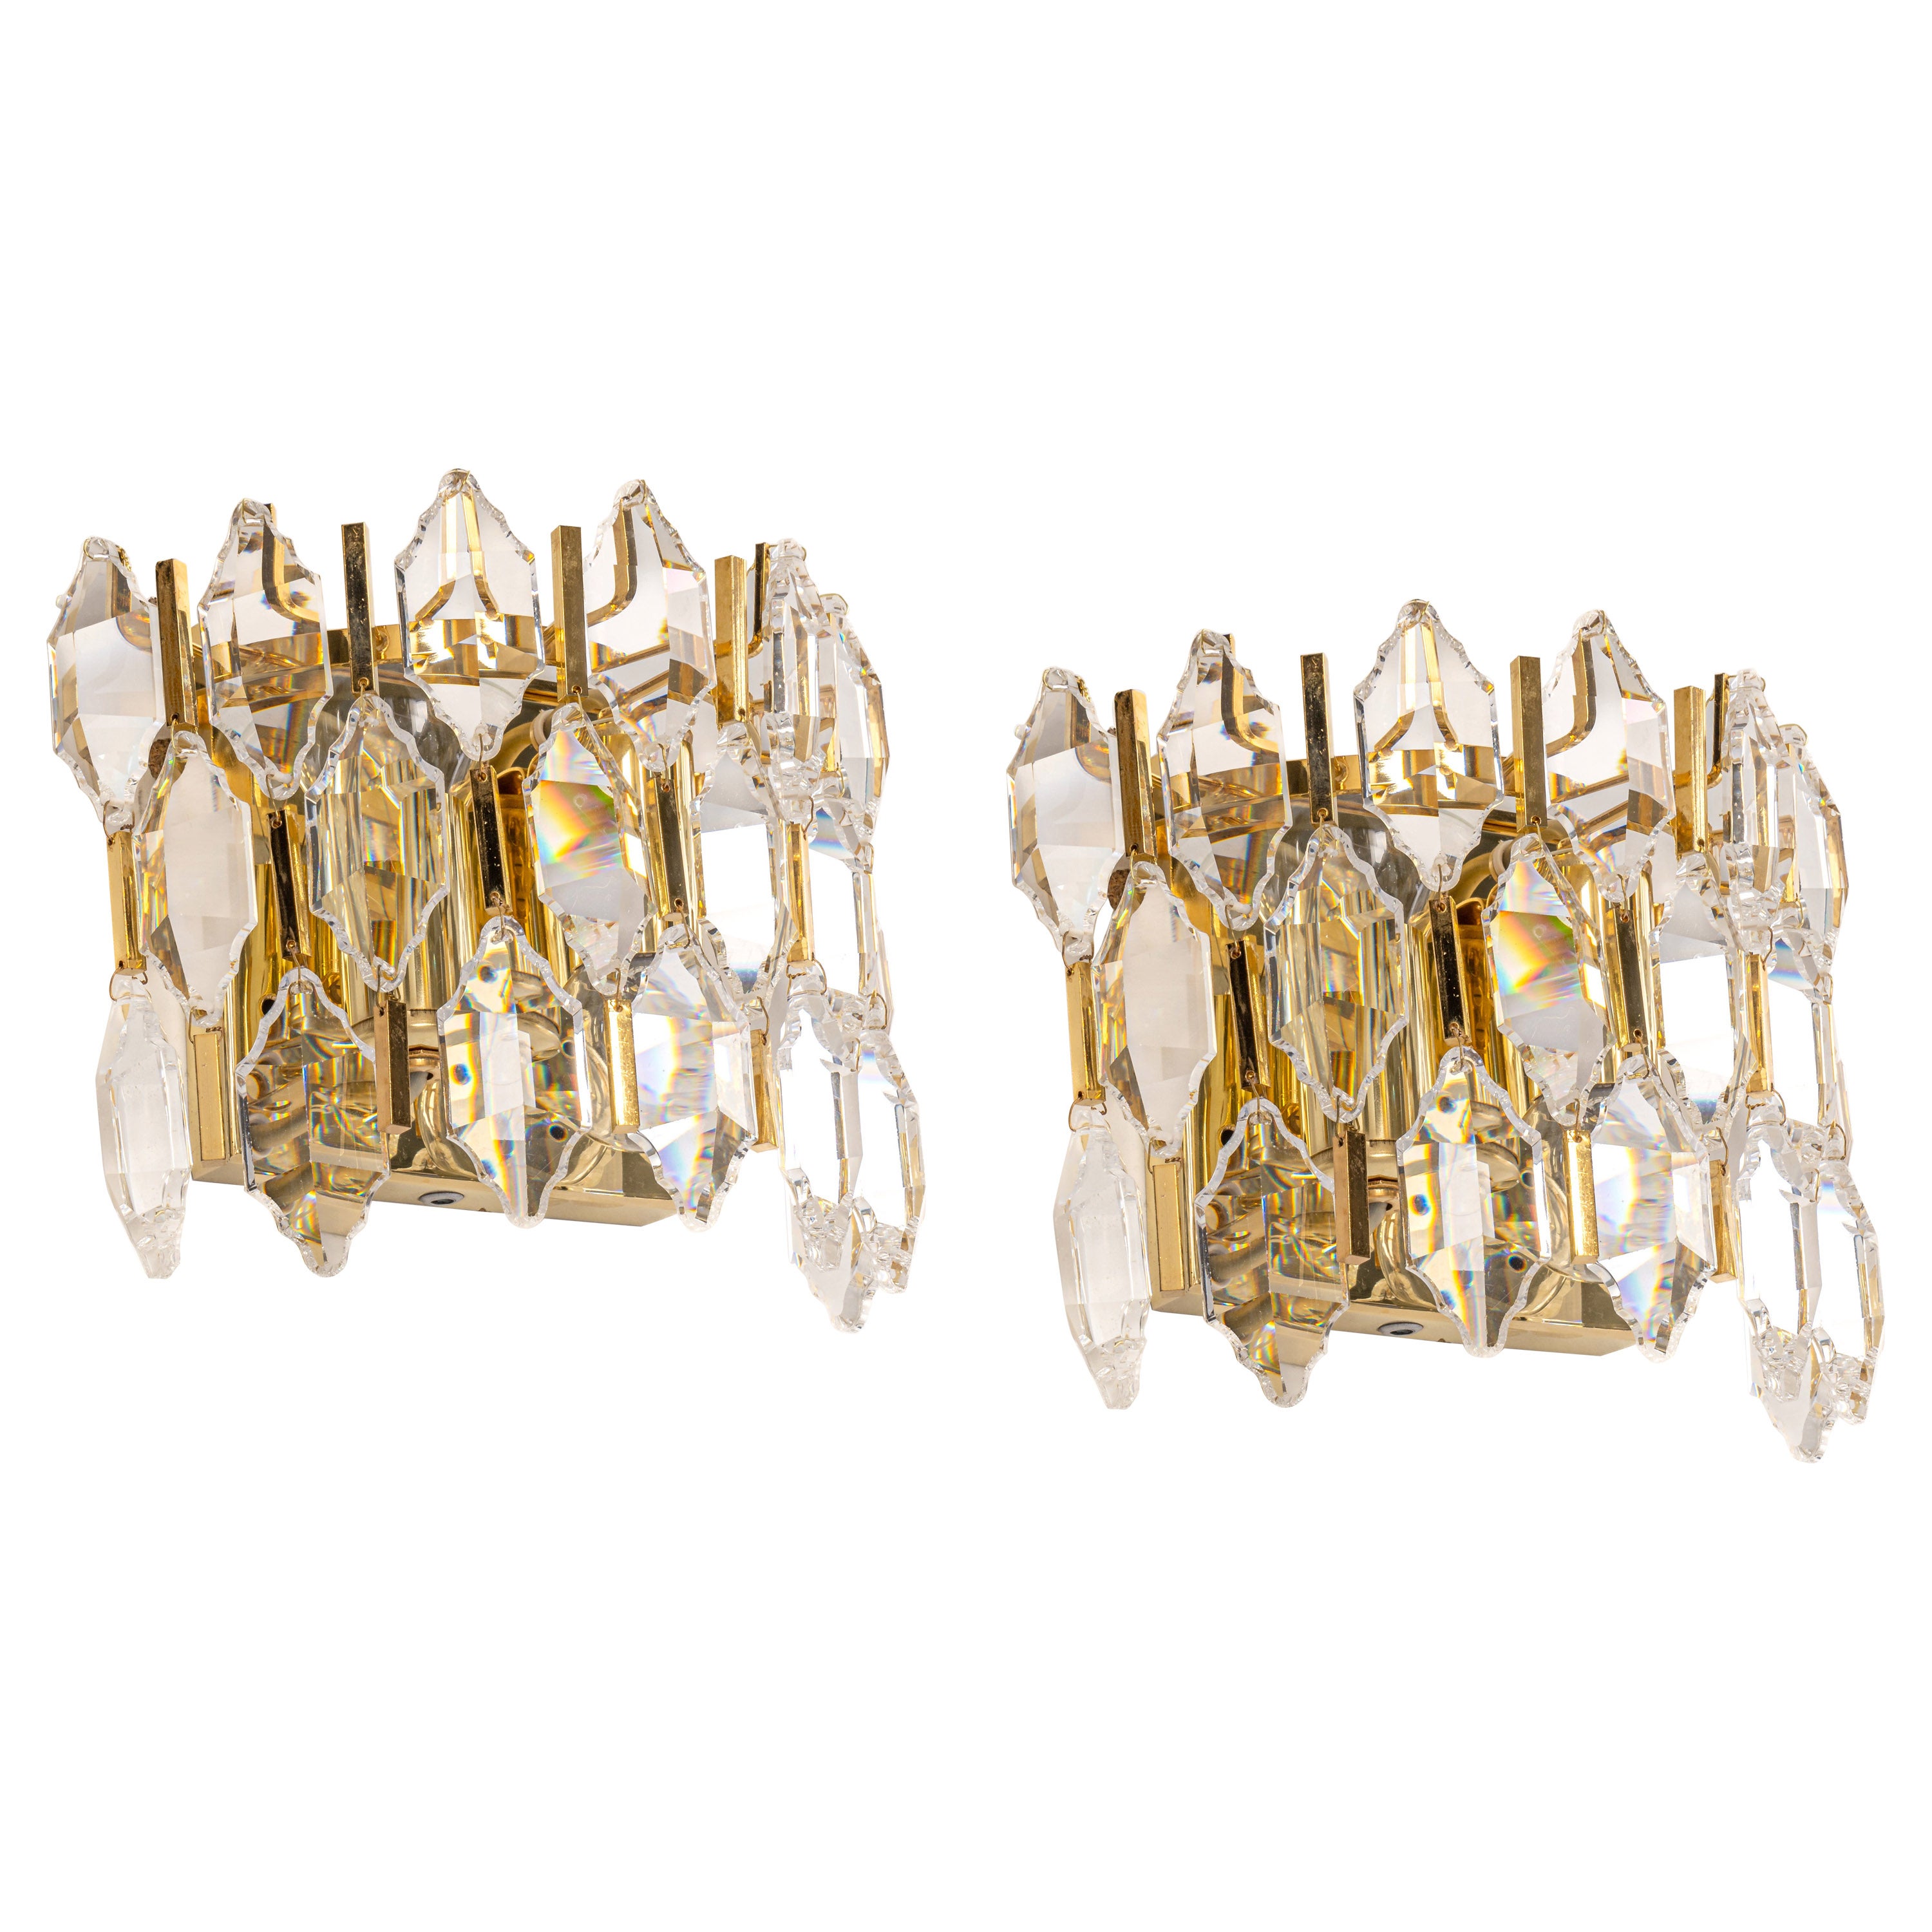 Pair of Golden Gilded Brass and Crystal Sconces by Palwa, Germany, 1970s For Sale